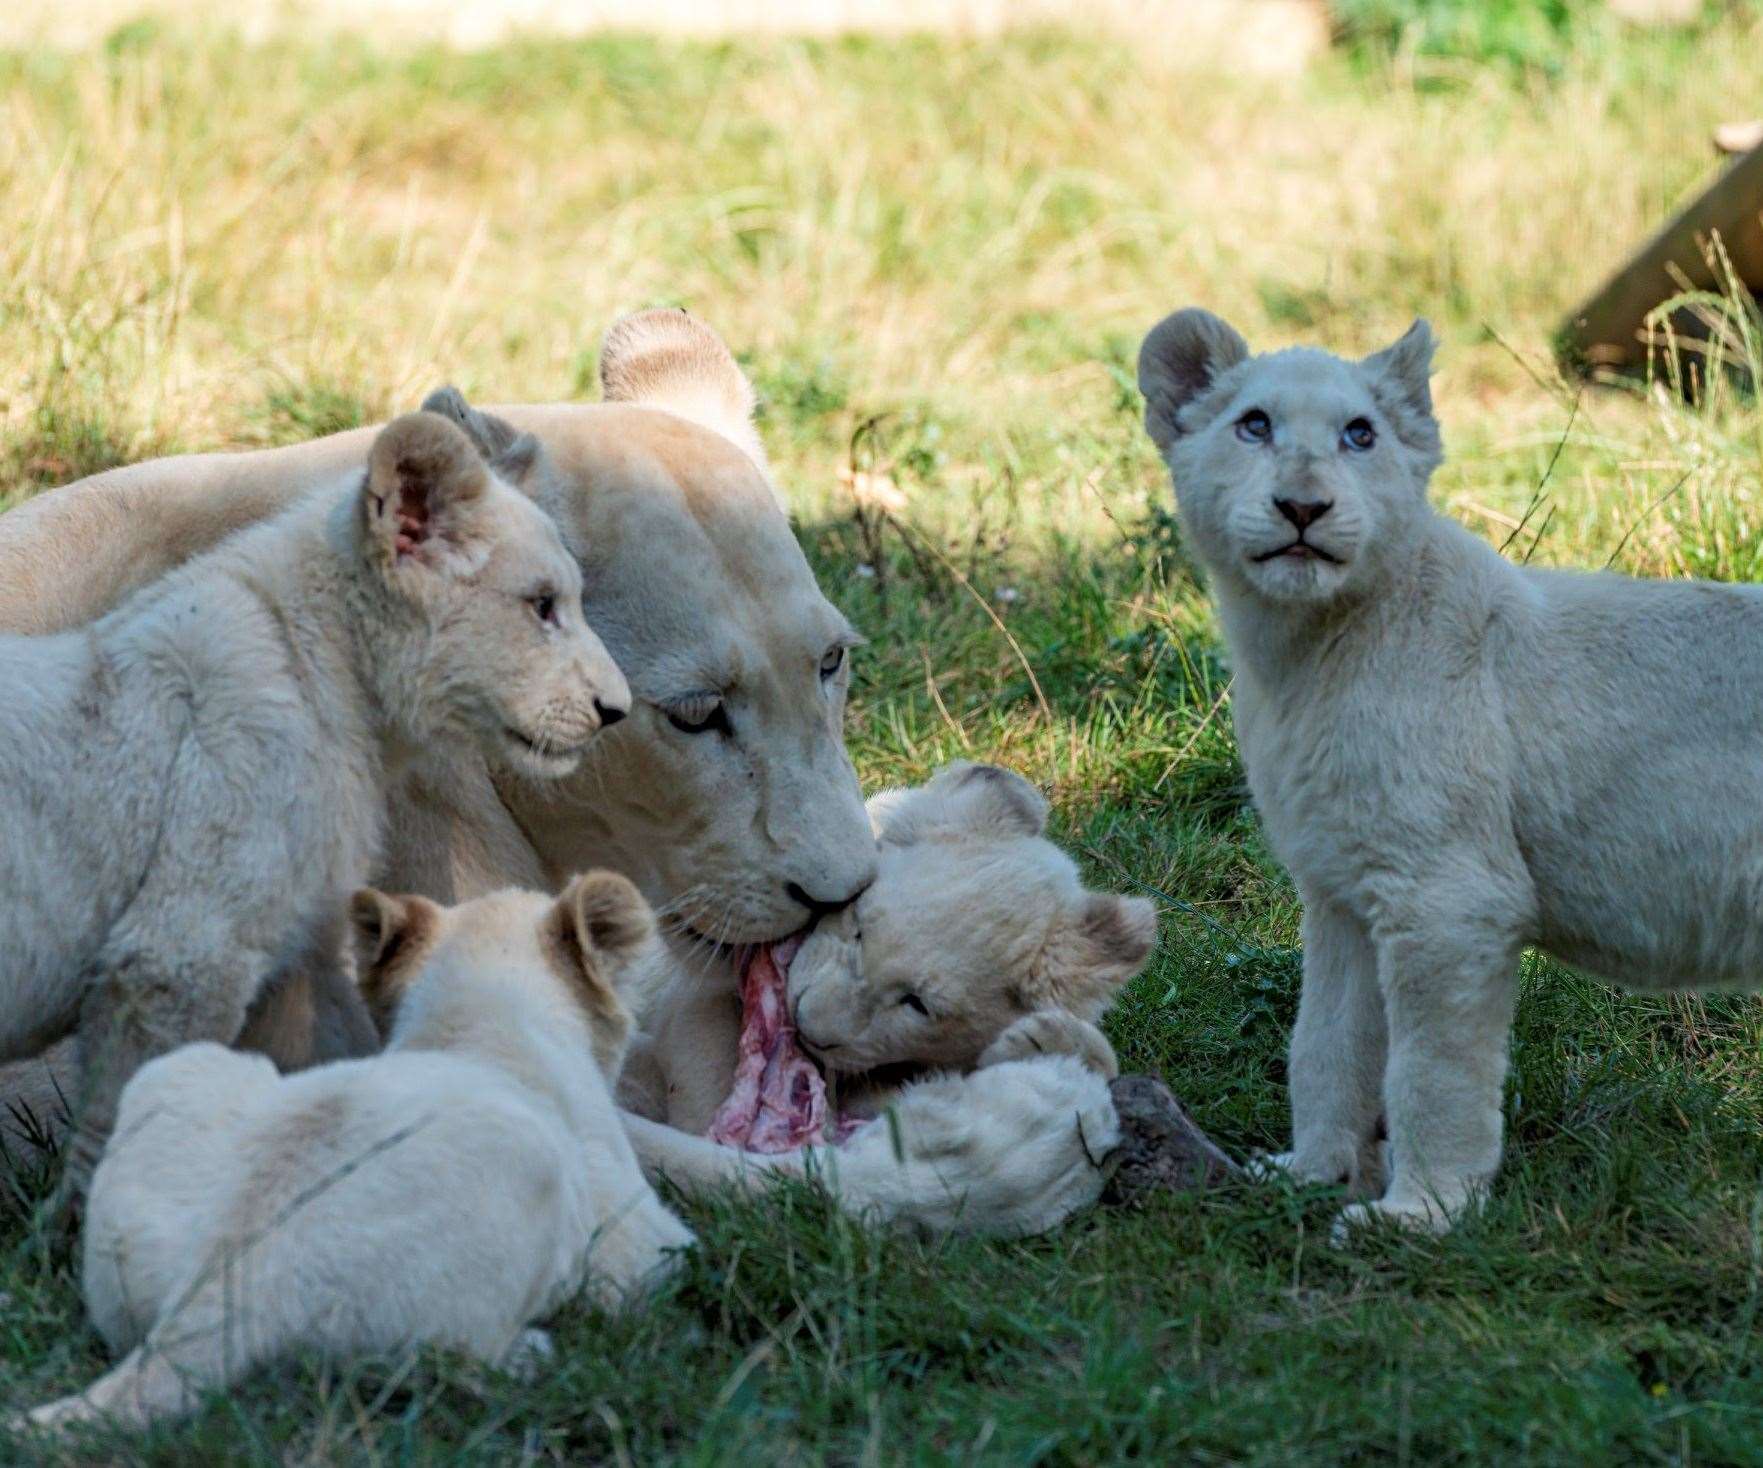 Joy pictured with her cubs